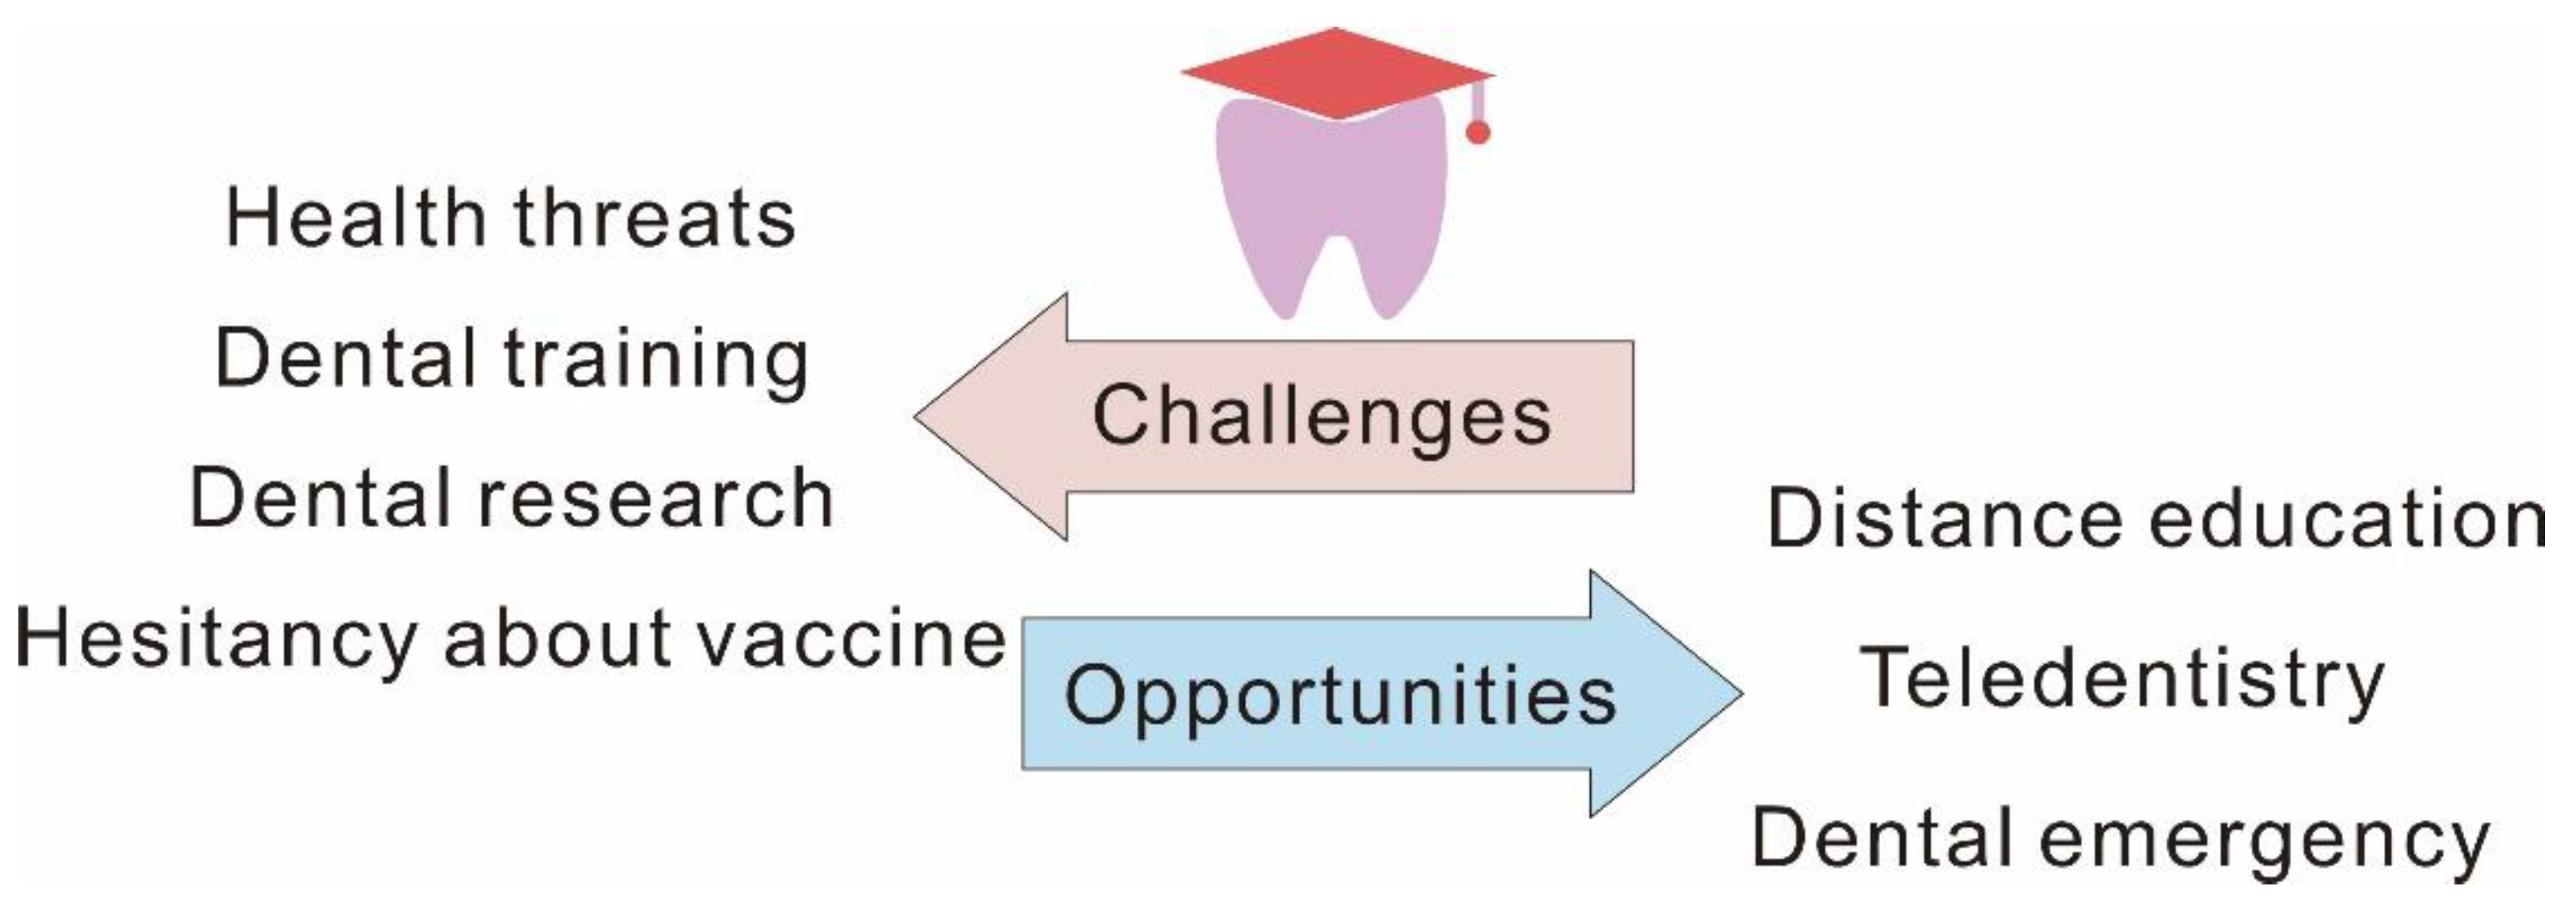 challenges in dental education